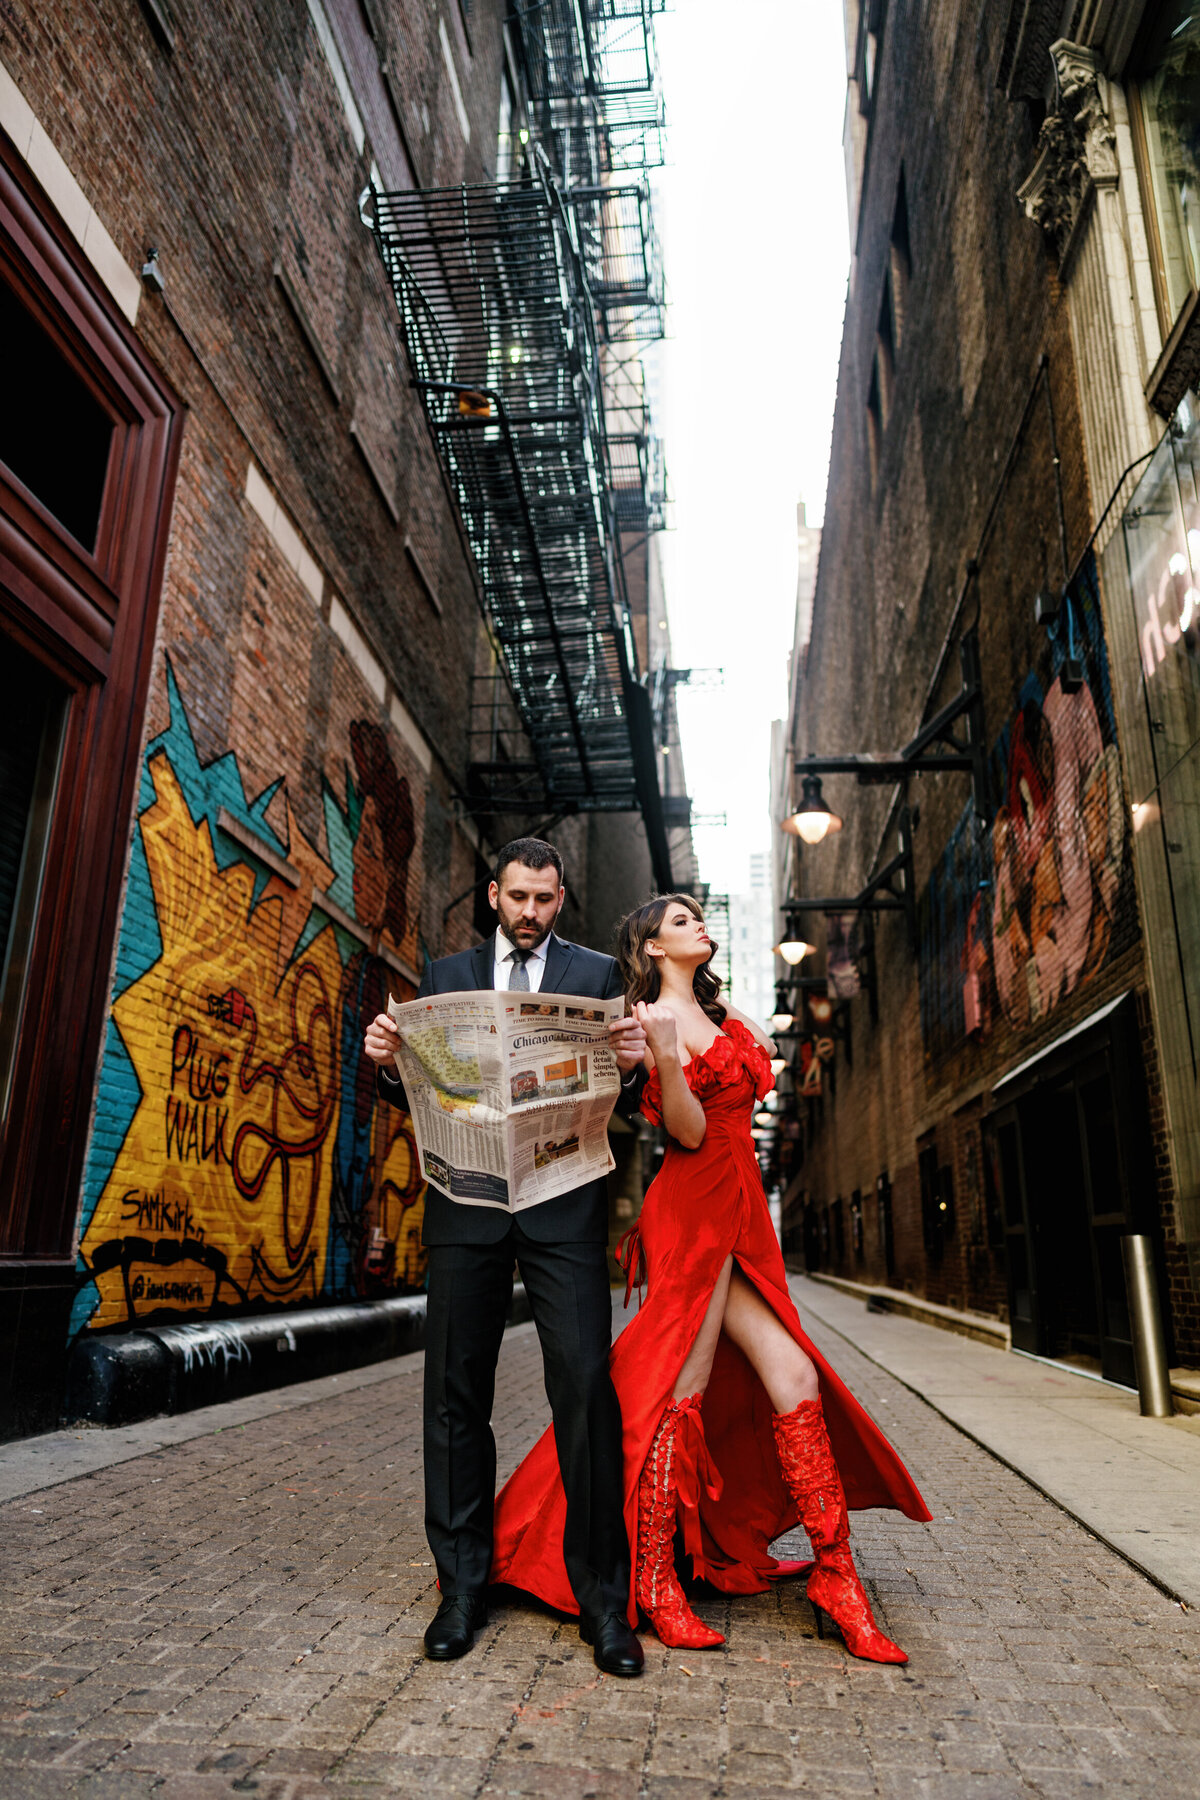 Aspen-Avenue-Chicago-Wedding-Photographer-Union-Station-Chicago-Theater-Engagement-Session-Timeless-Romantic-Red-Dress-Editorial-Stemming-From-Love-Bry-Jean-Artistry-The-Bridal-Collective-True-to-color-Luxury-FAV-115